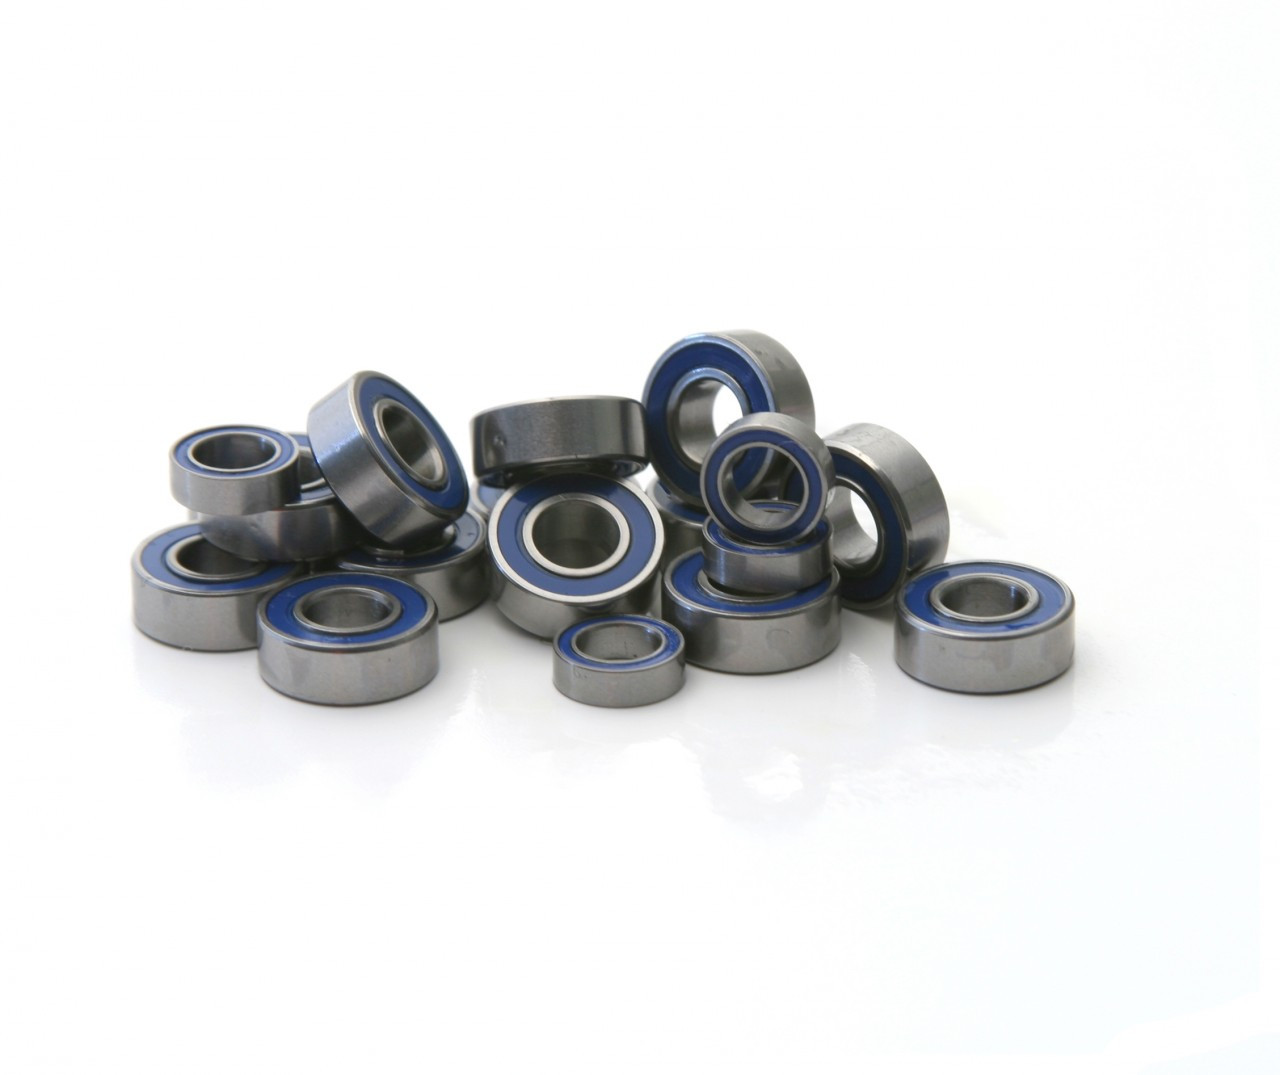 FOR Traxxas Nitro Rustler Complete replacement bearing kit.